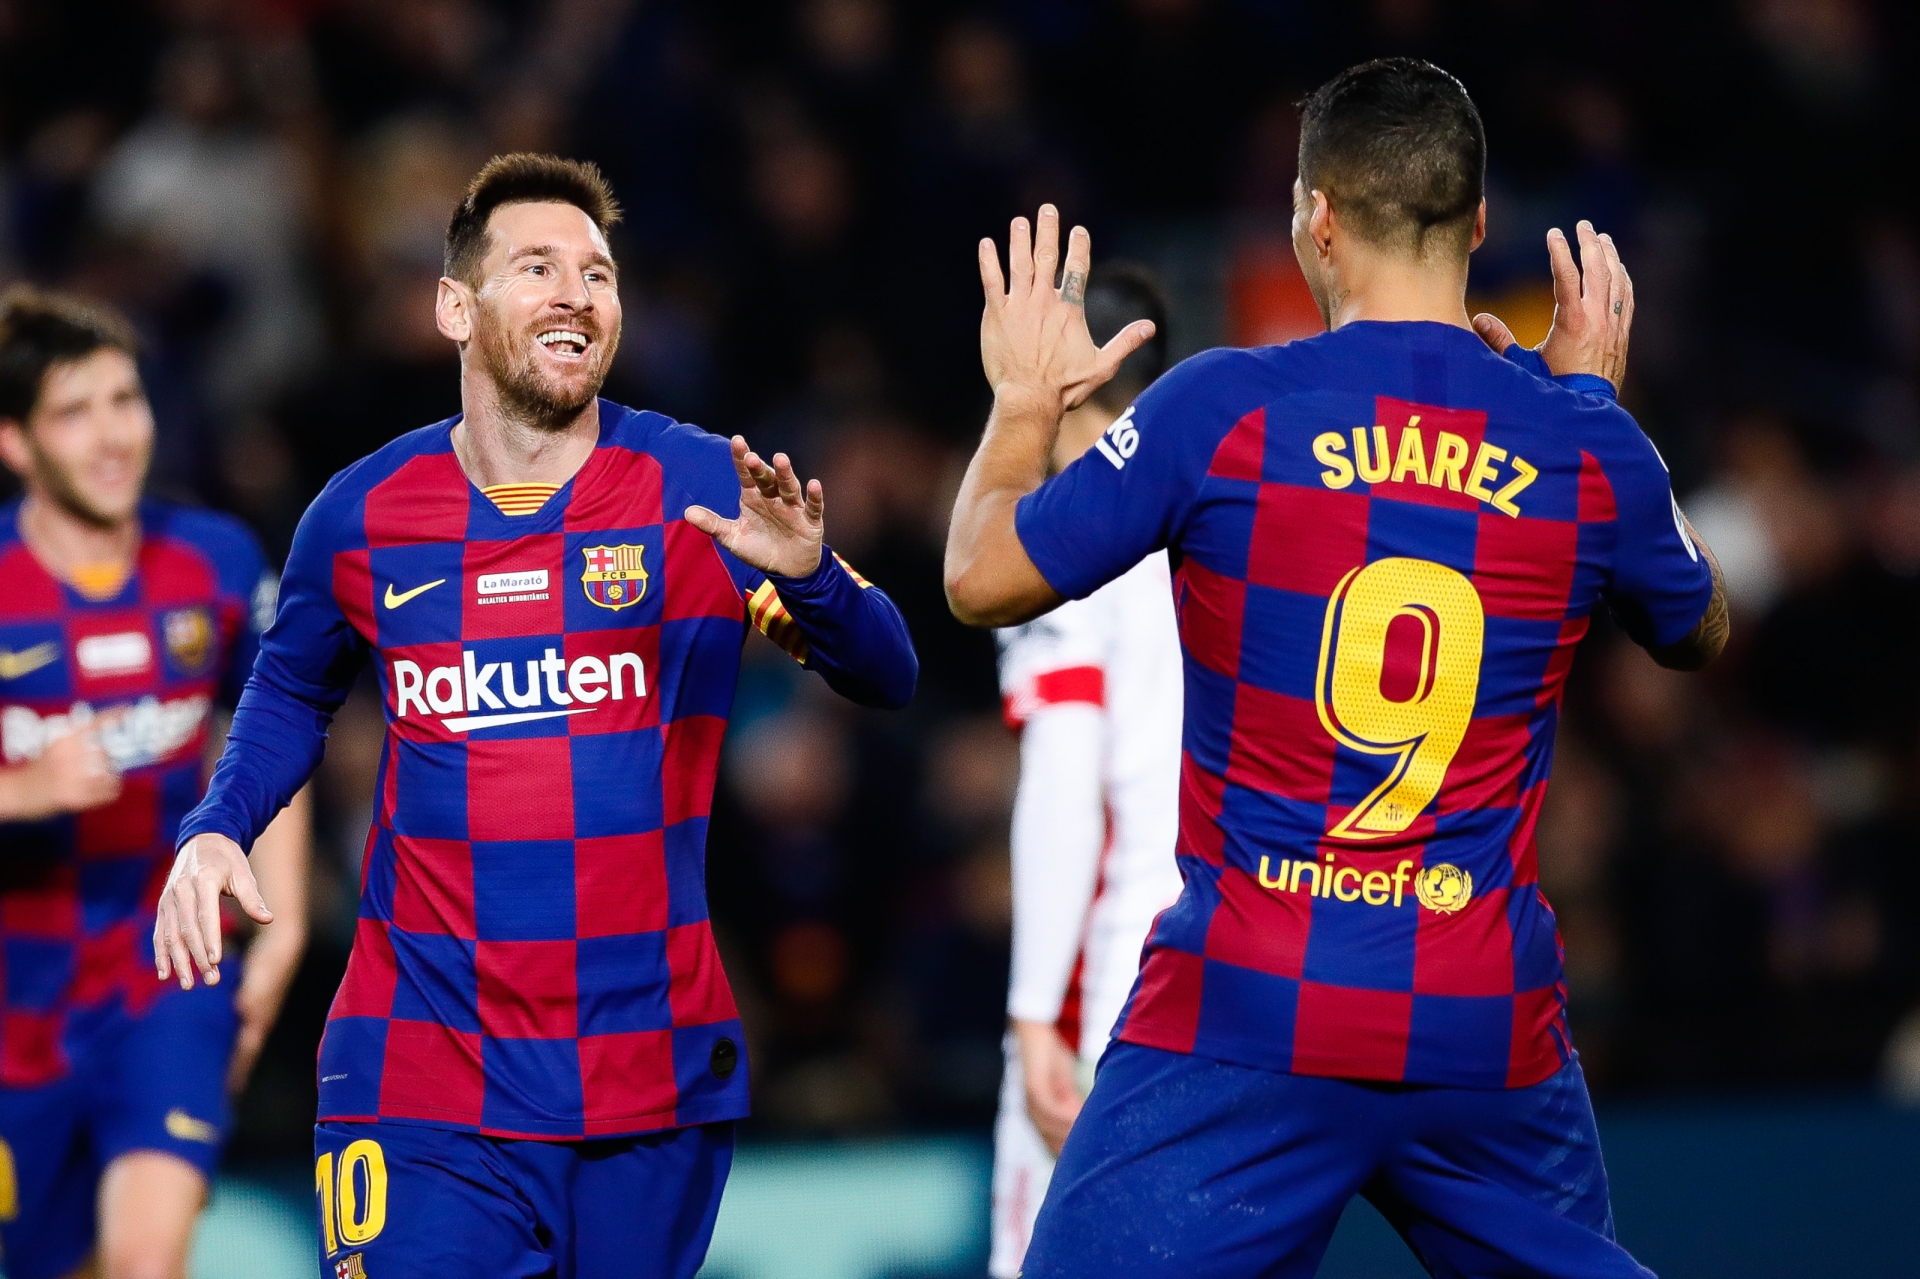 https___everythingbarca.com_wp-content_uploads_getty-images_2018_08_1192552455